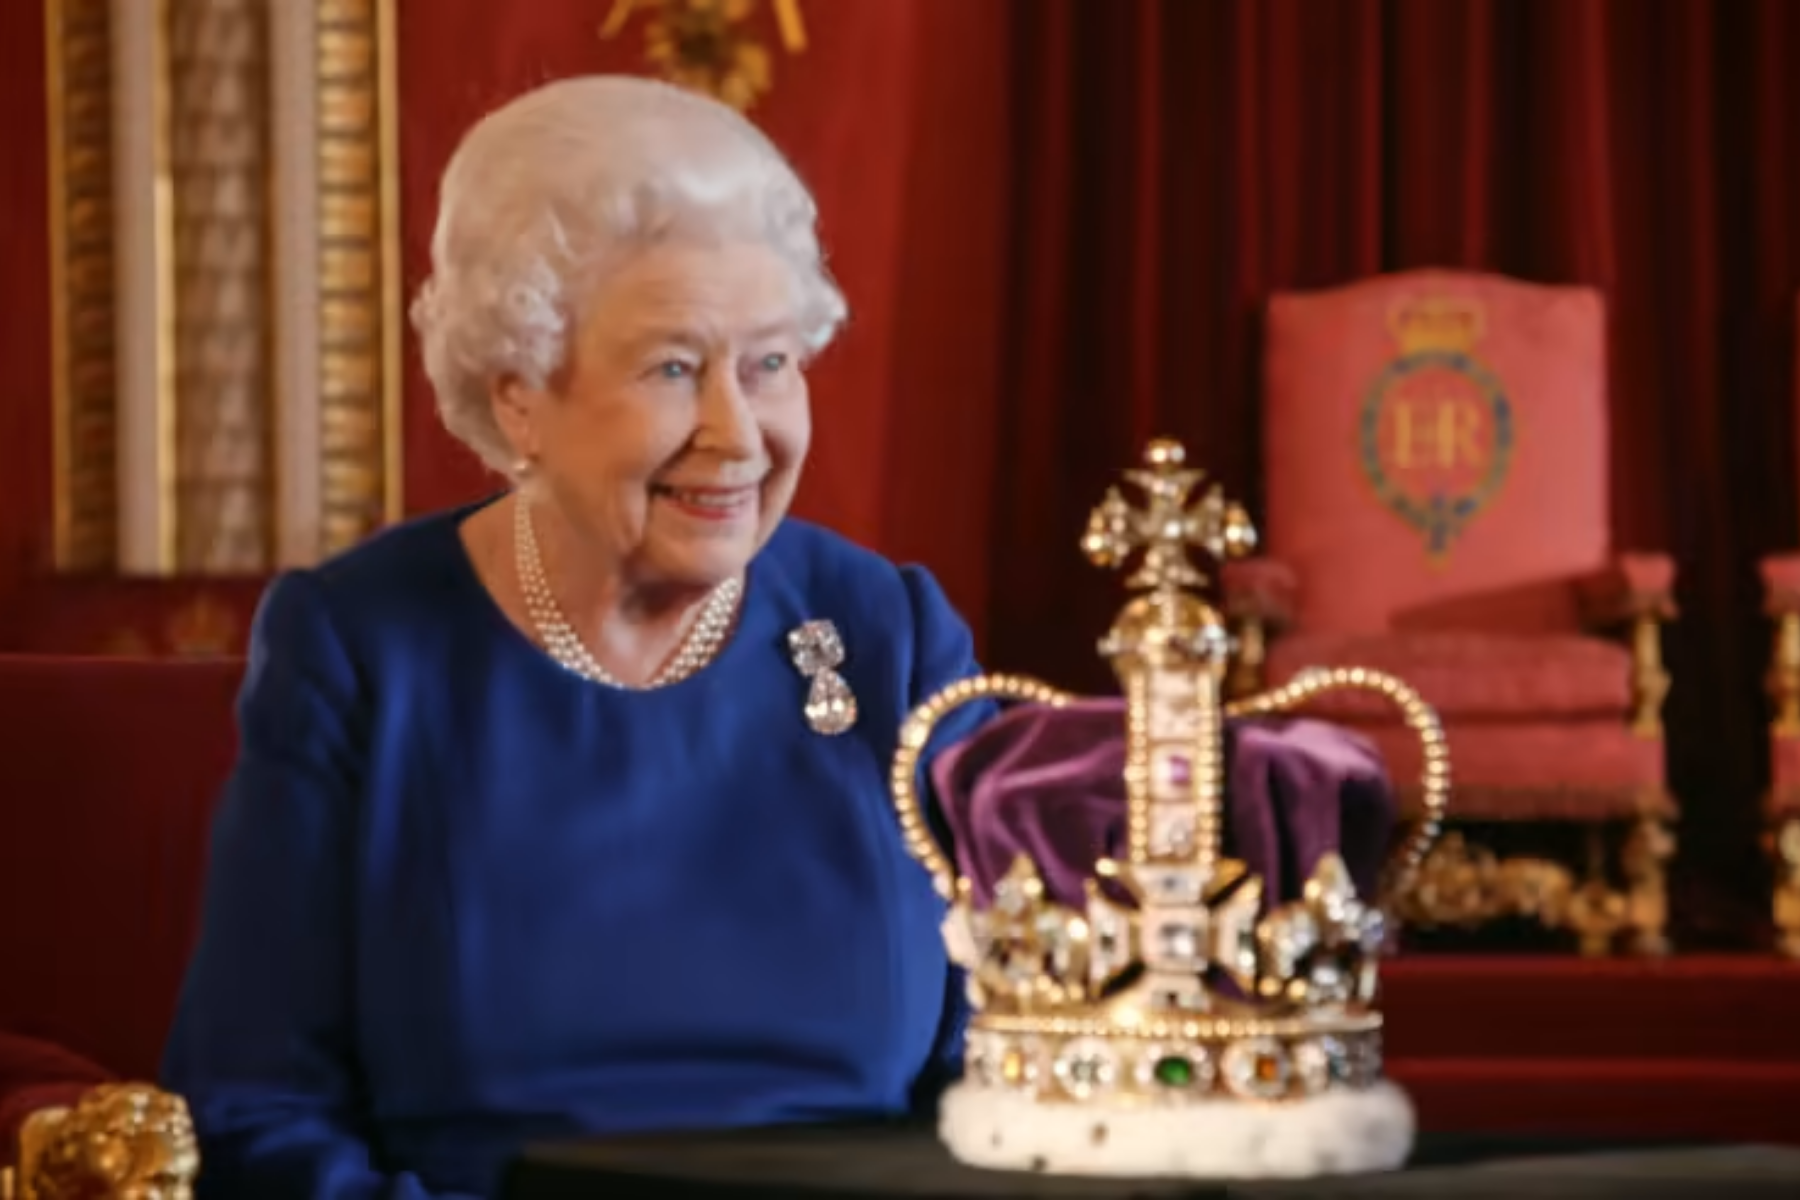 Queen Elizabeth II spoke with the historical crown Imperial State Crown